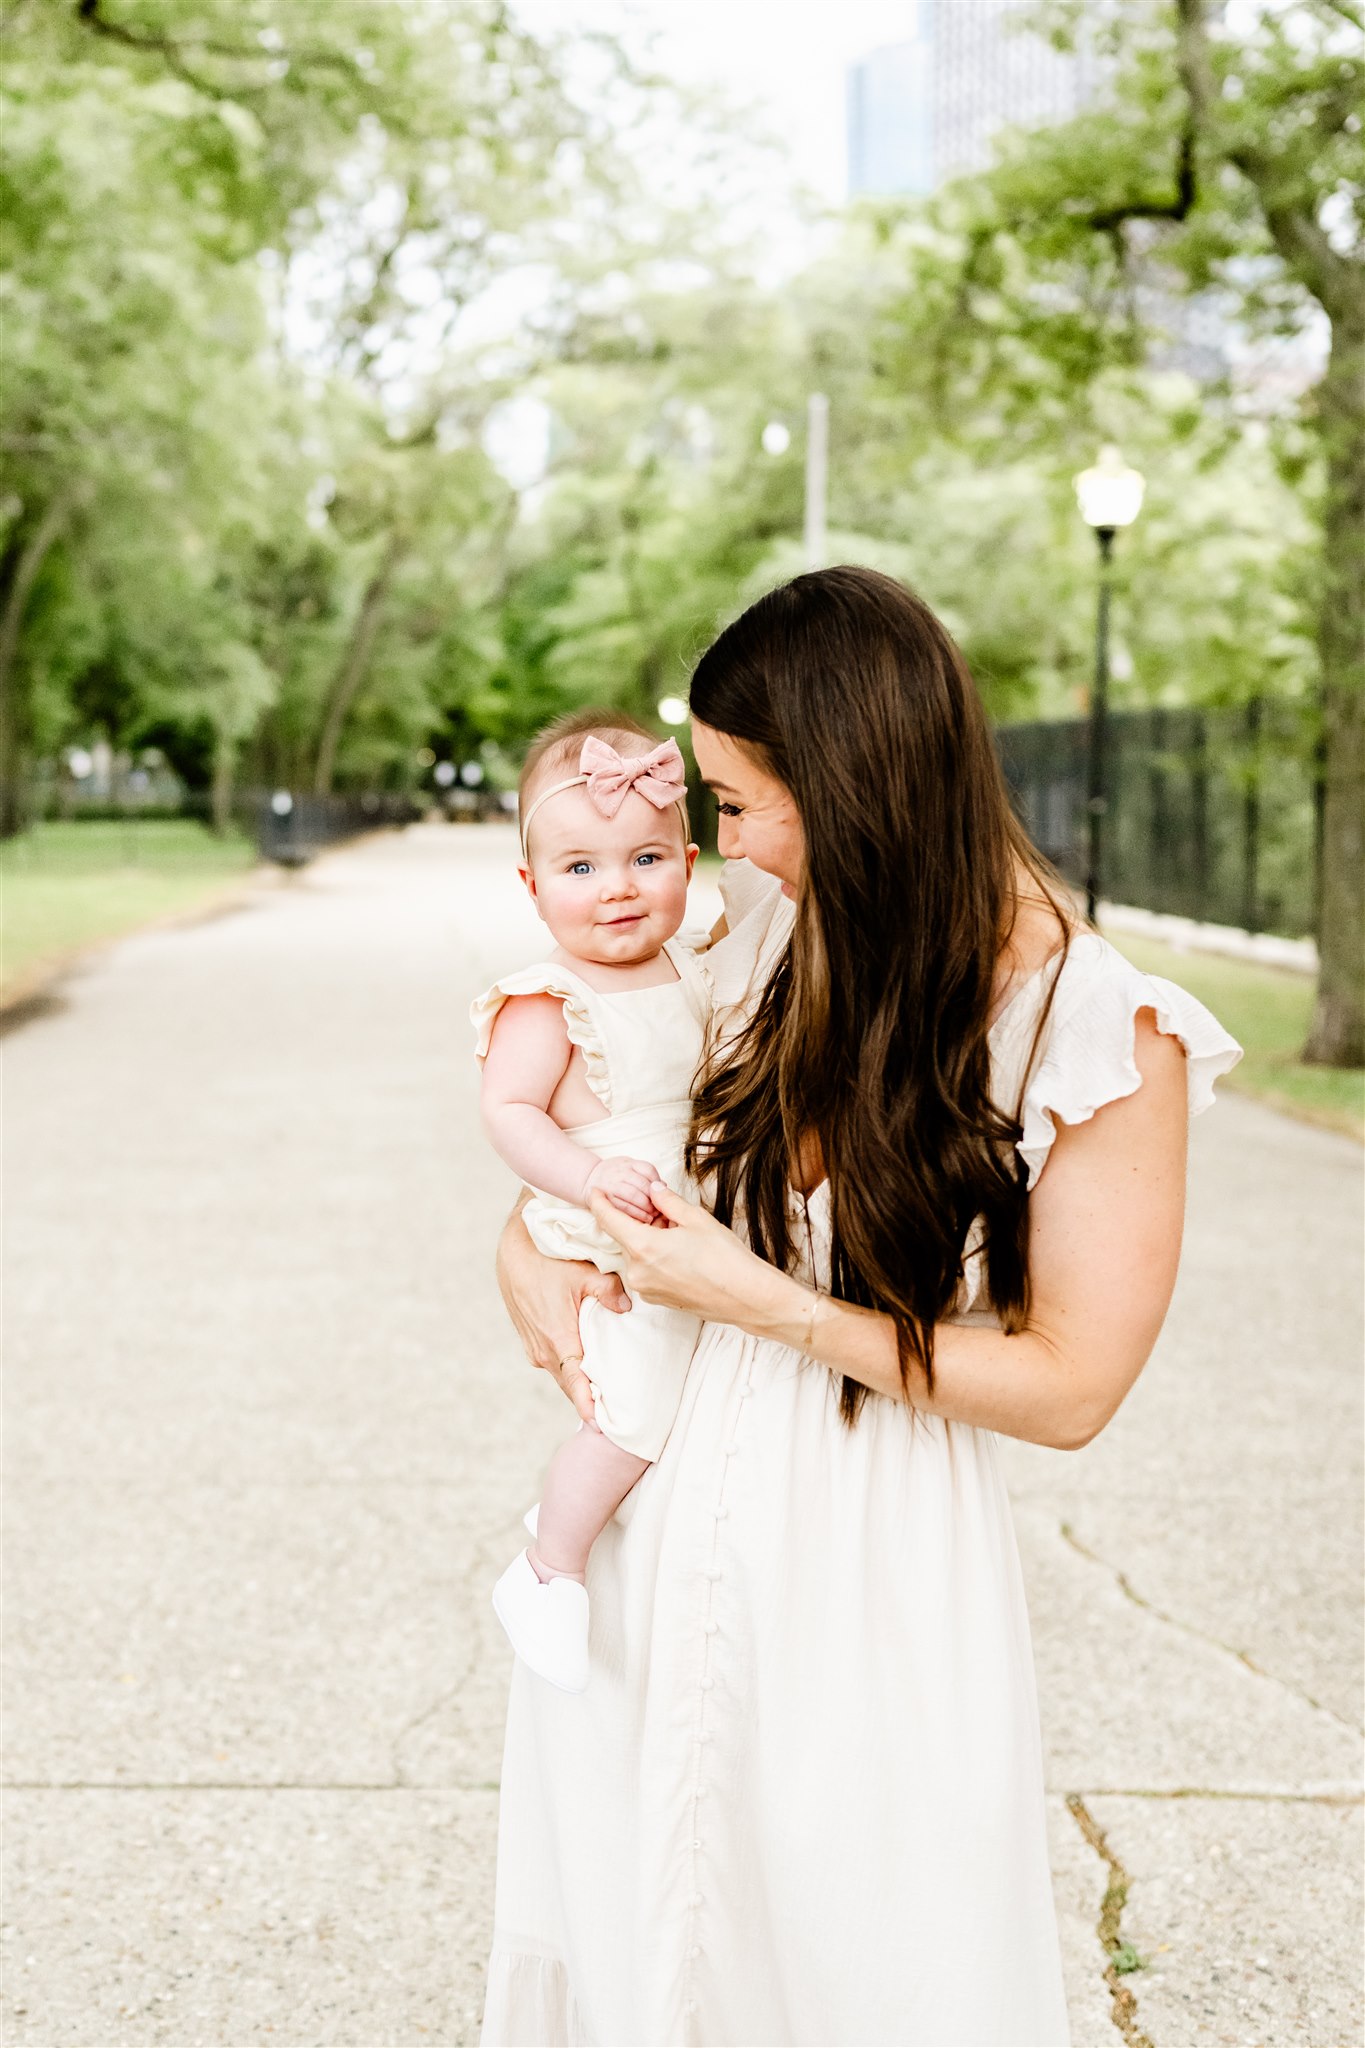 A mother in a white dress walks through a park sidewalk with her infant daughter in a pink bow on her hip